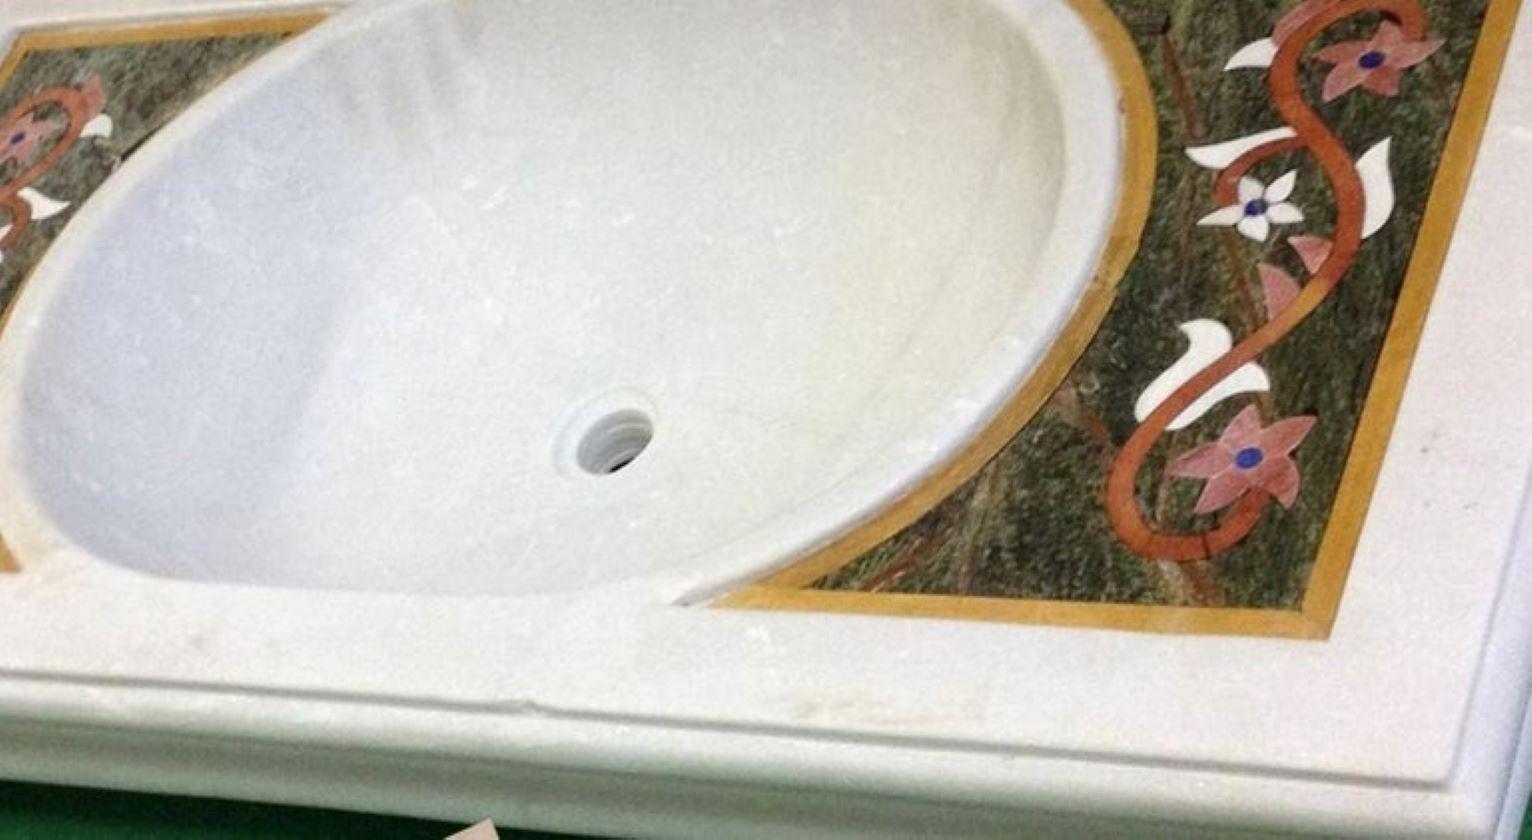 Classical Inlaid Marble Stone Sink Basin In Good Condition For Sale In Cranbrook, Kent